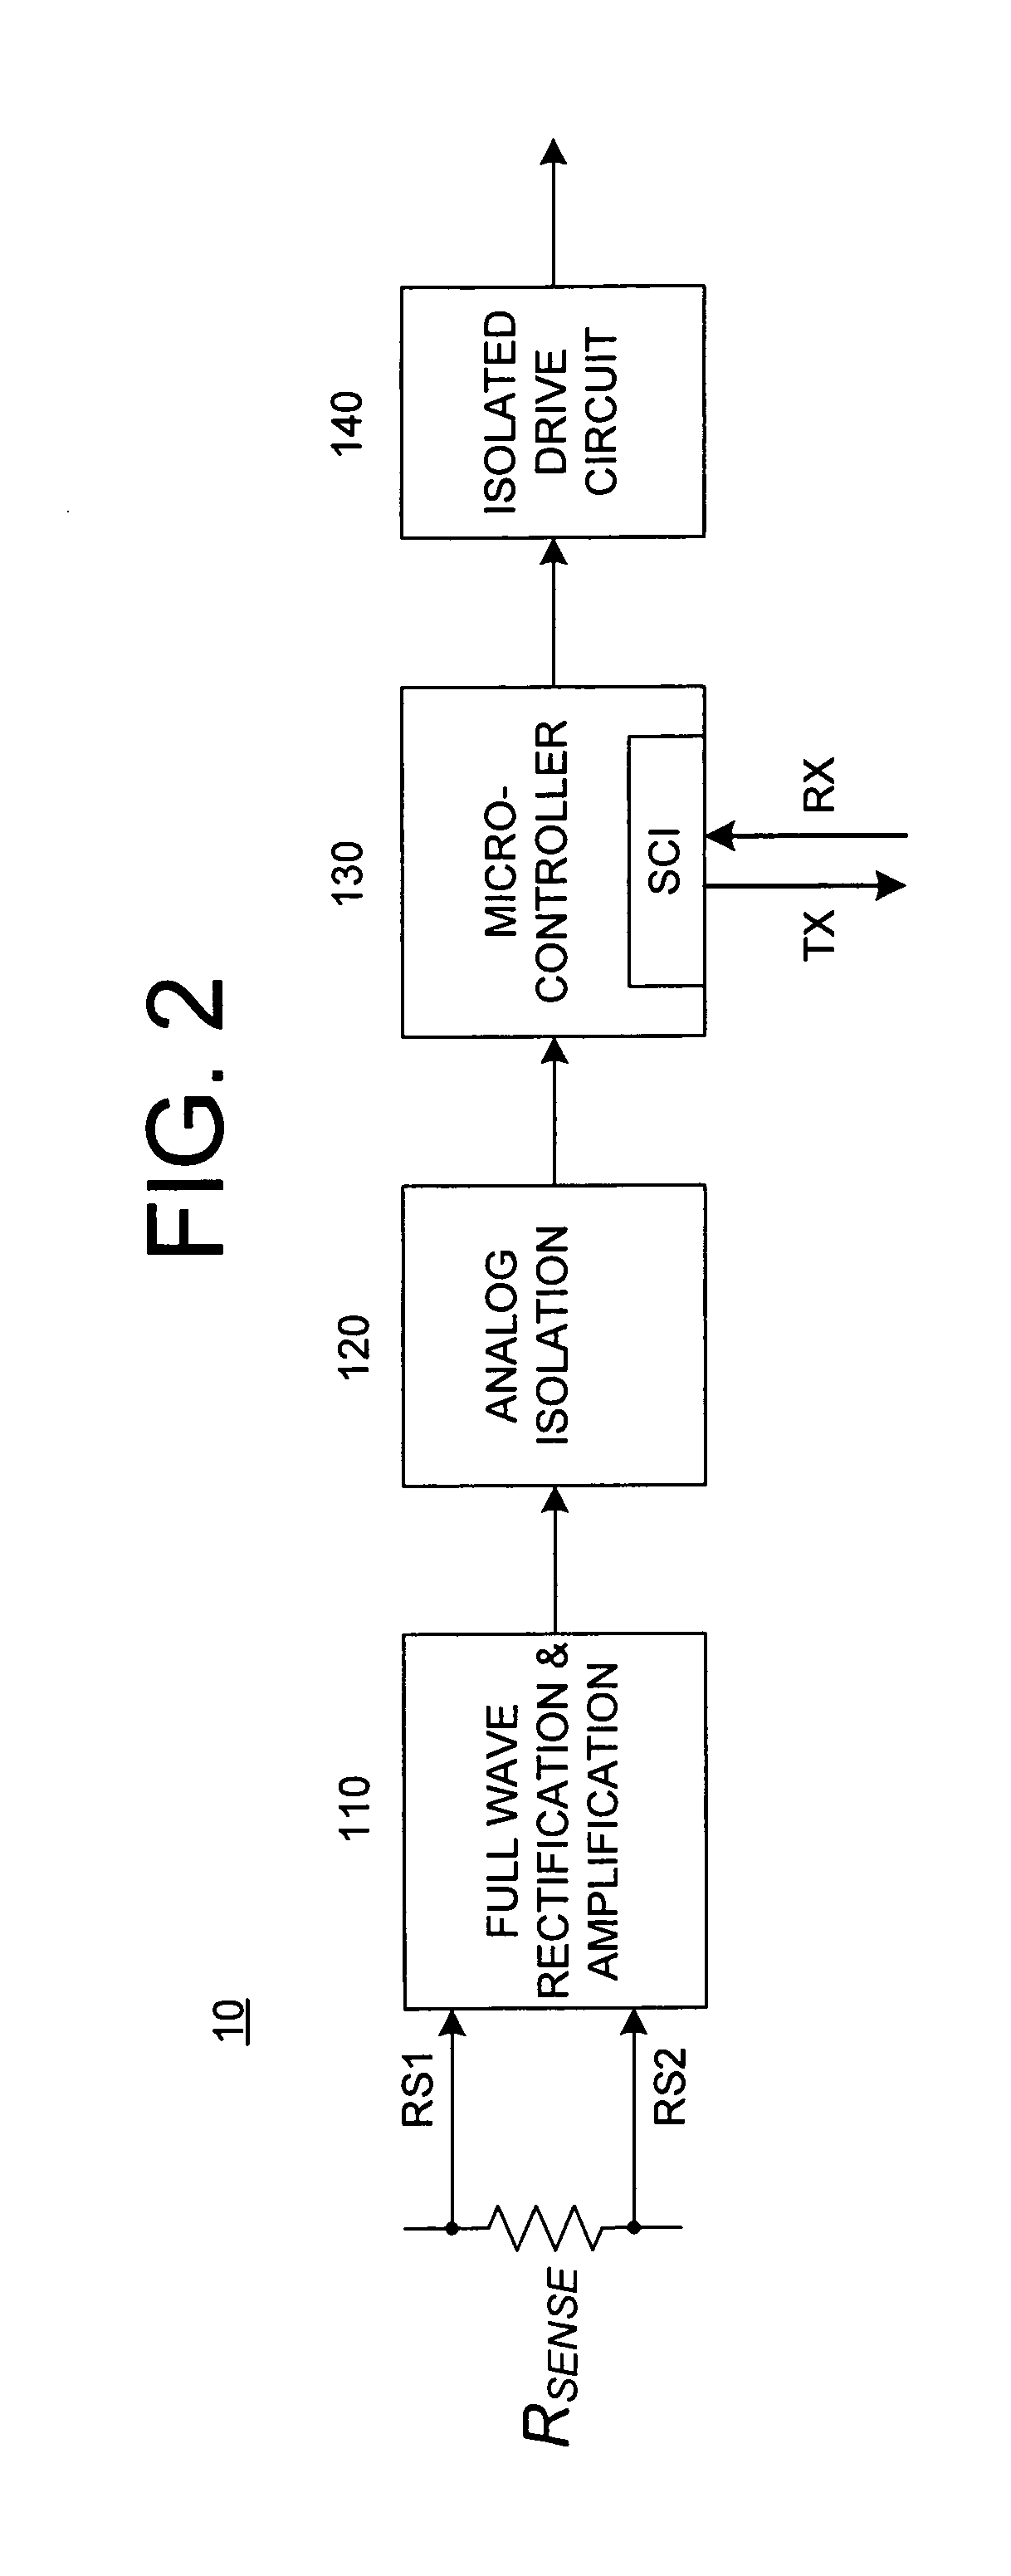 Method and apparatus applying virtual Deltat trip criterion in power distribution